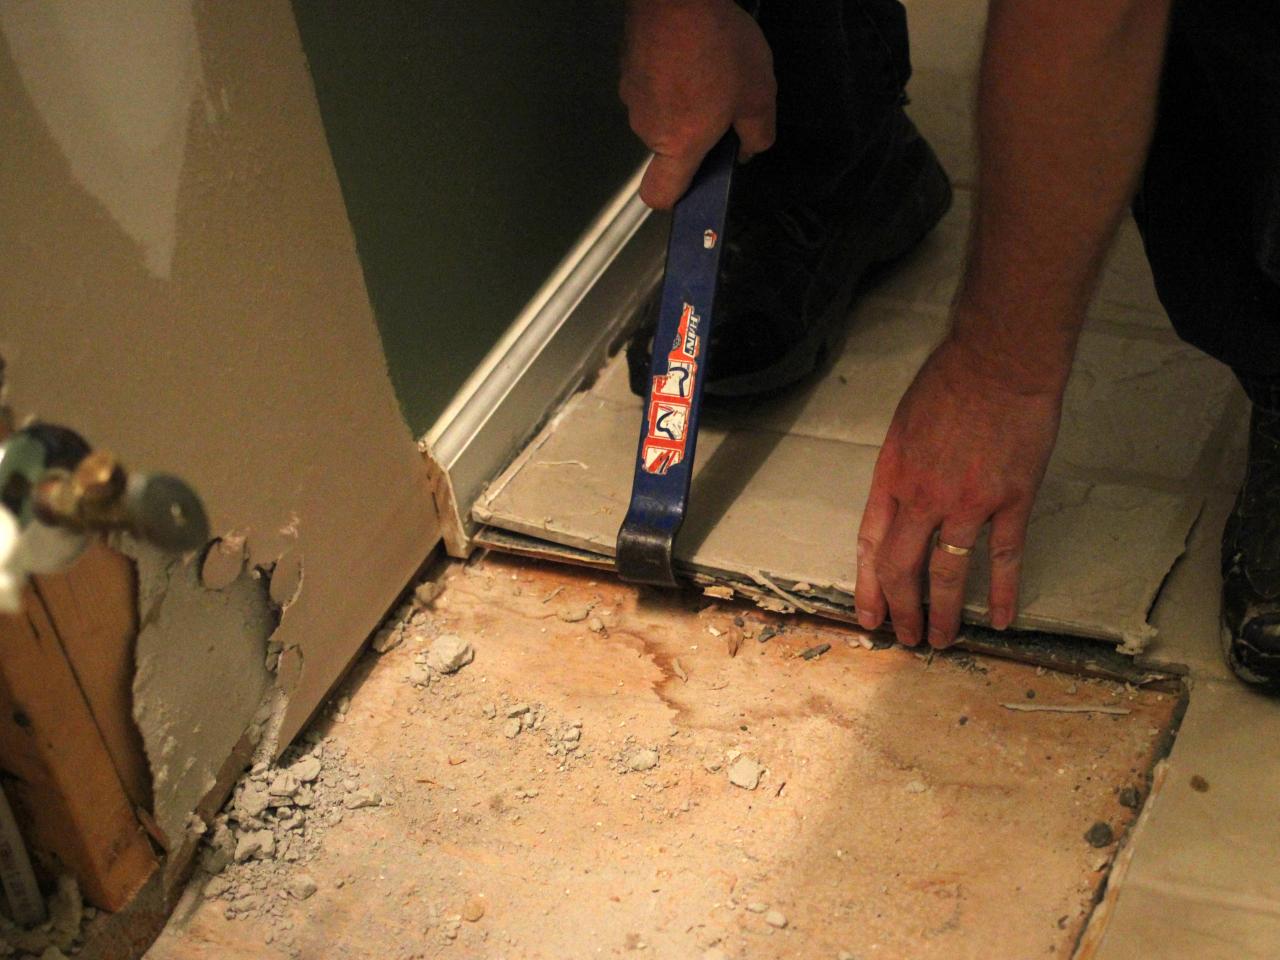 How To Remove A Tile Floor, How To Remove Ceramic Tile Floor From Concrete